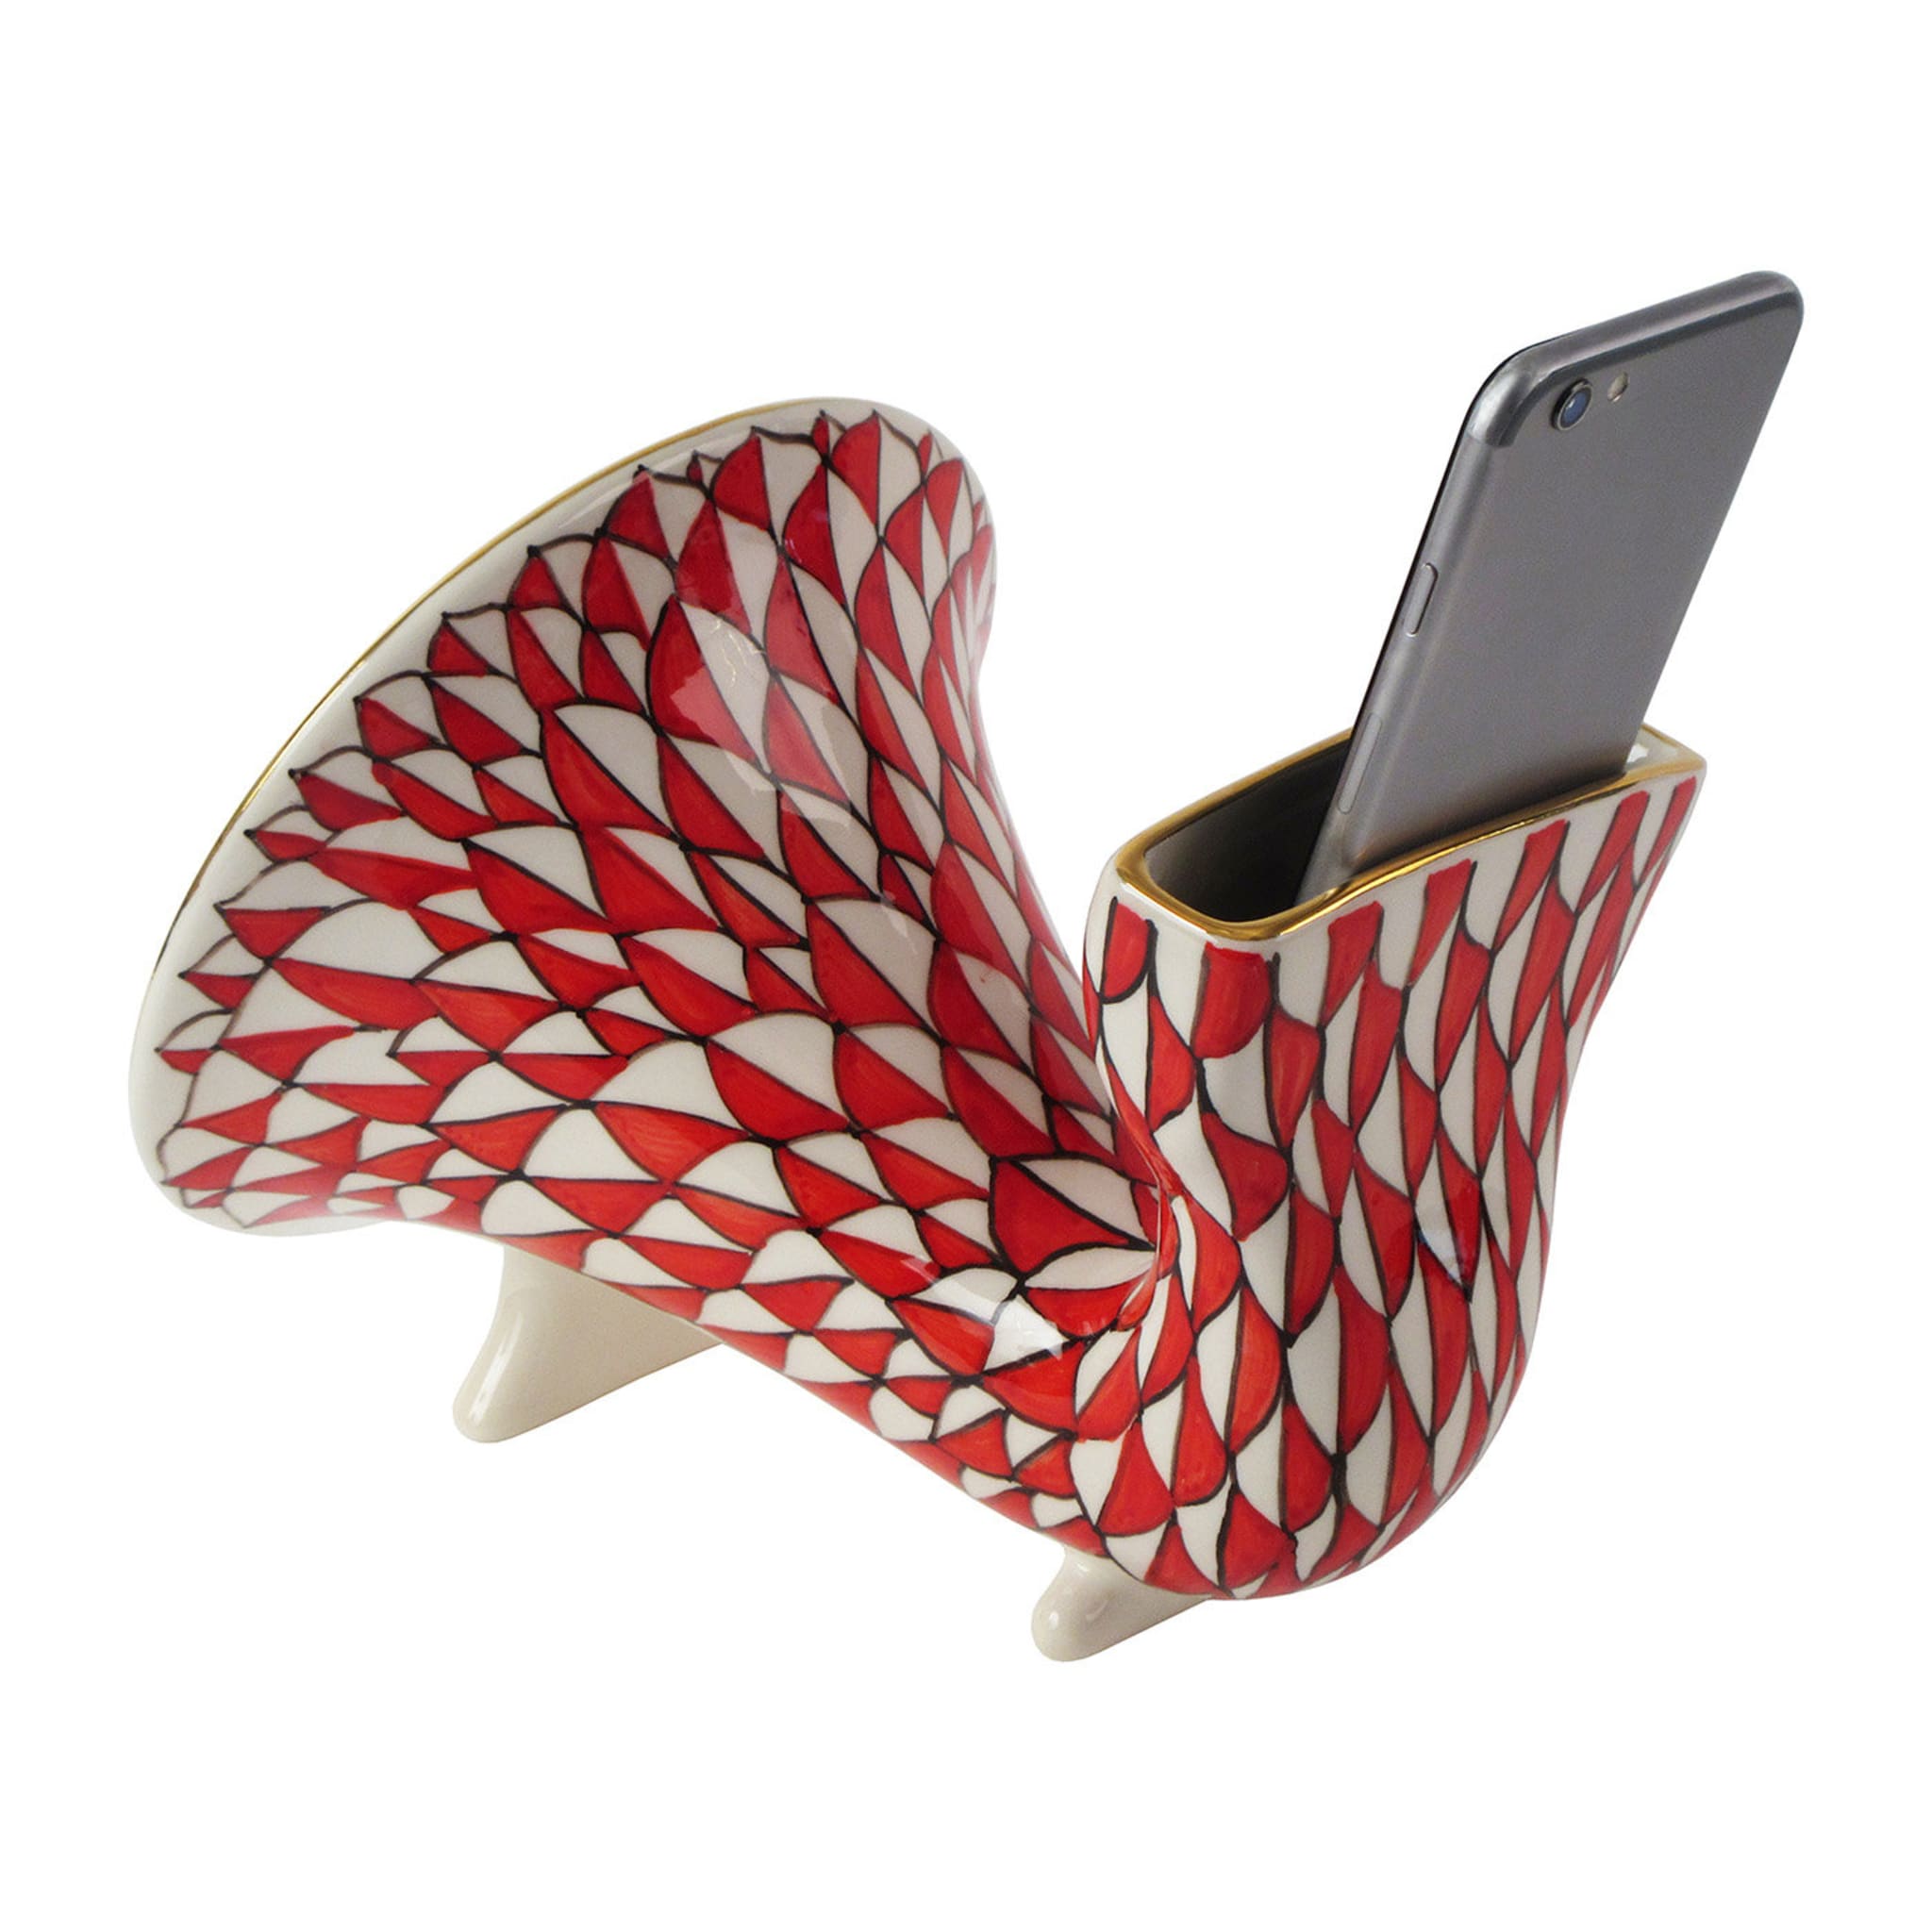 Red and White Smartphone Amplifier - Alternative view 2